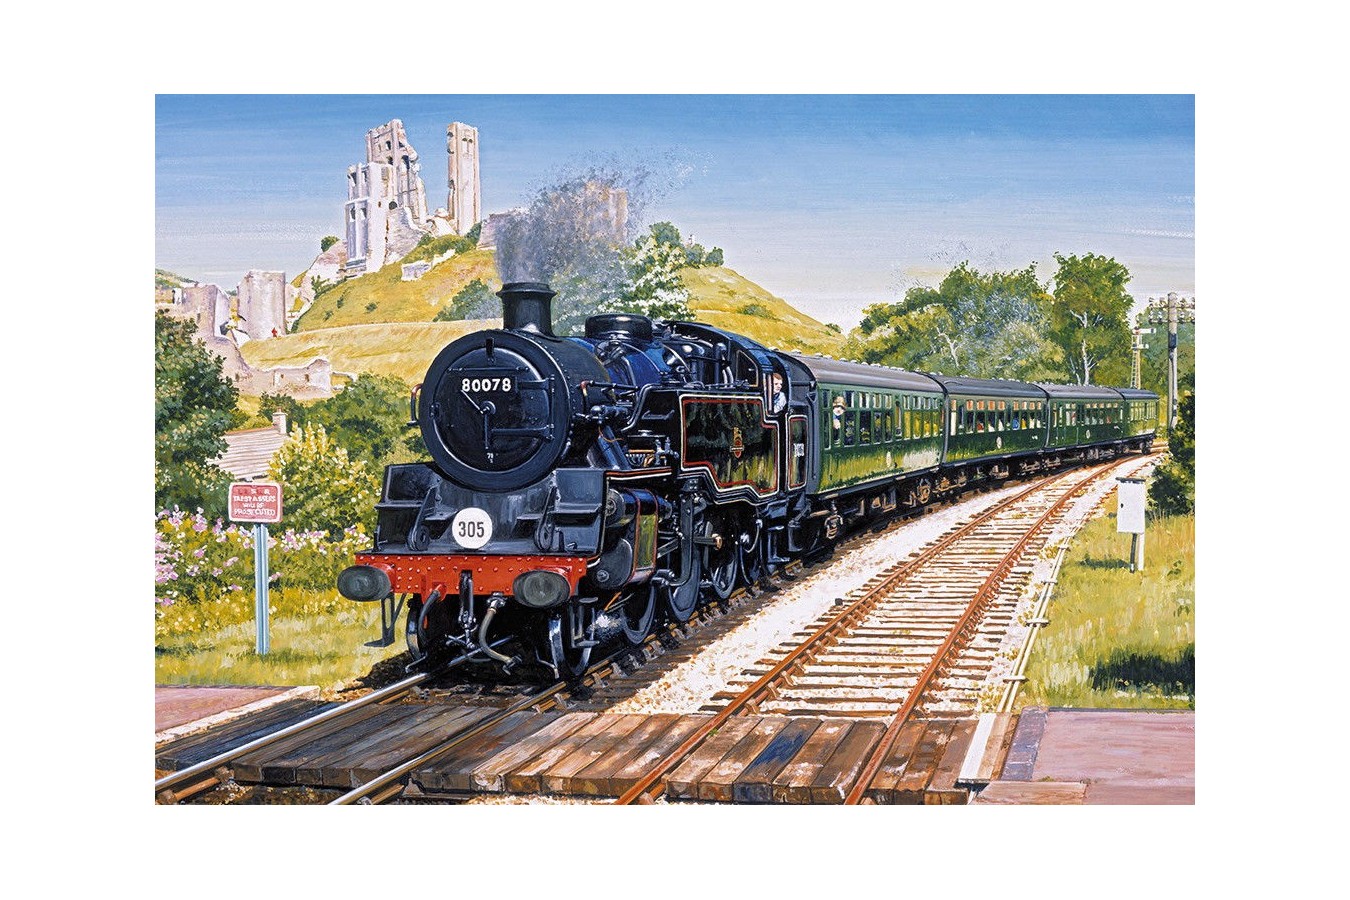 Puzzle Gibsons - Corfe Castle Crossing, 500 piese (65123)